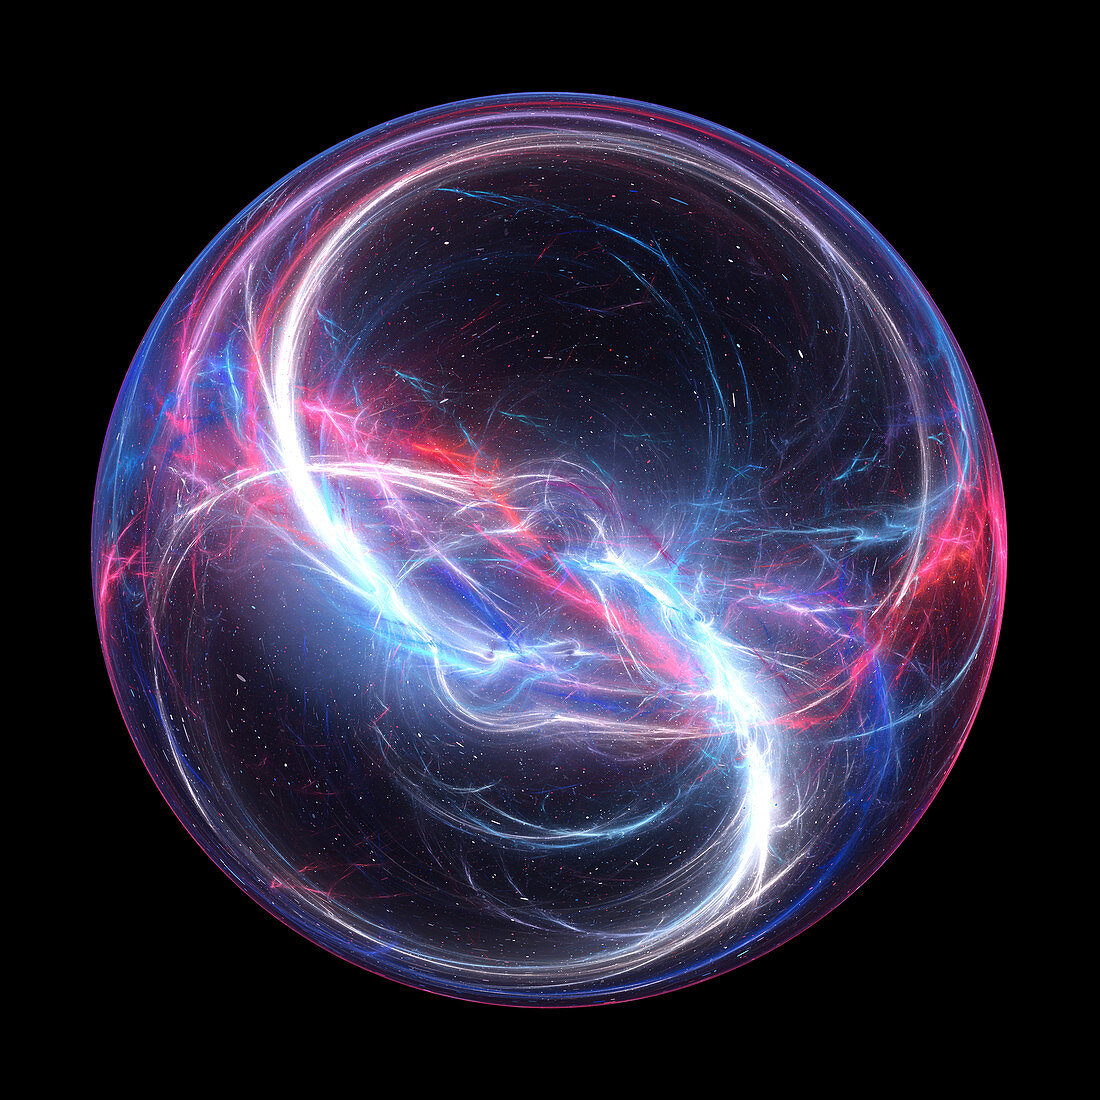 Discharged energy ball, conceptual illustration